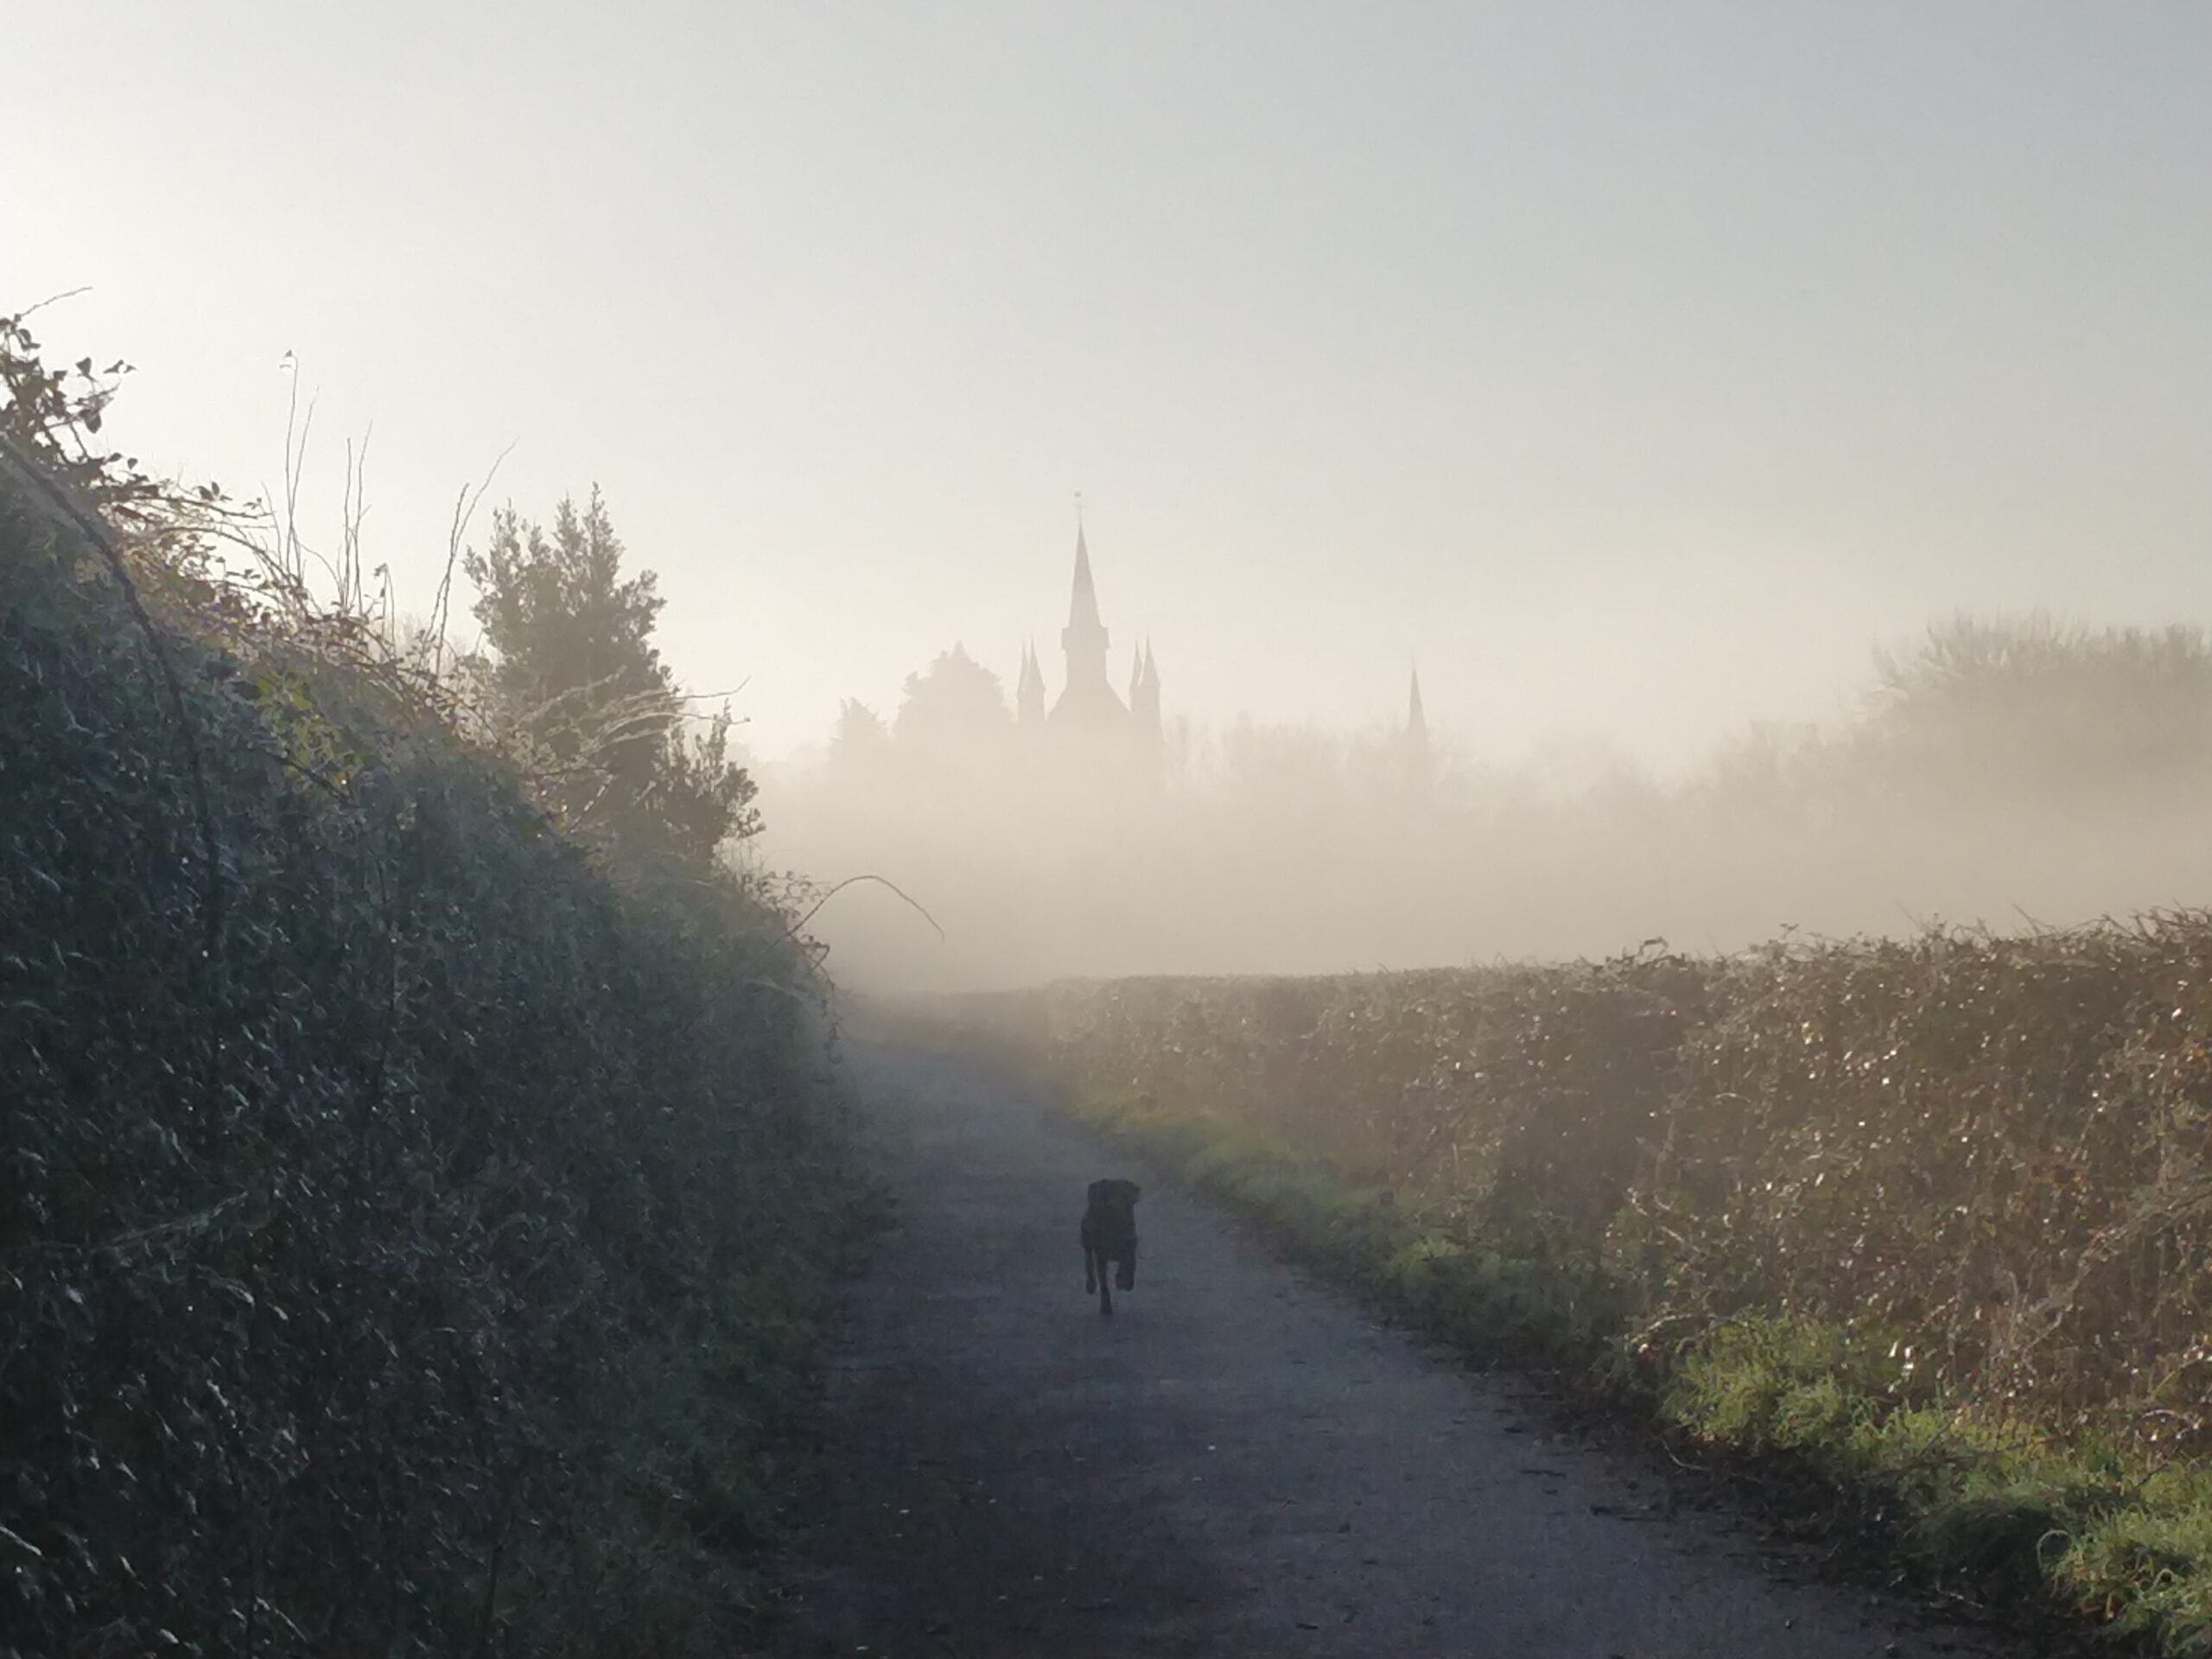 A dog runs out of the mist along a hedged path, and a church tower, surrounded by trees, makes a misted silhouette in the background.